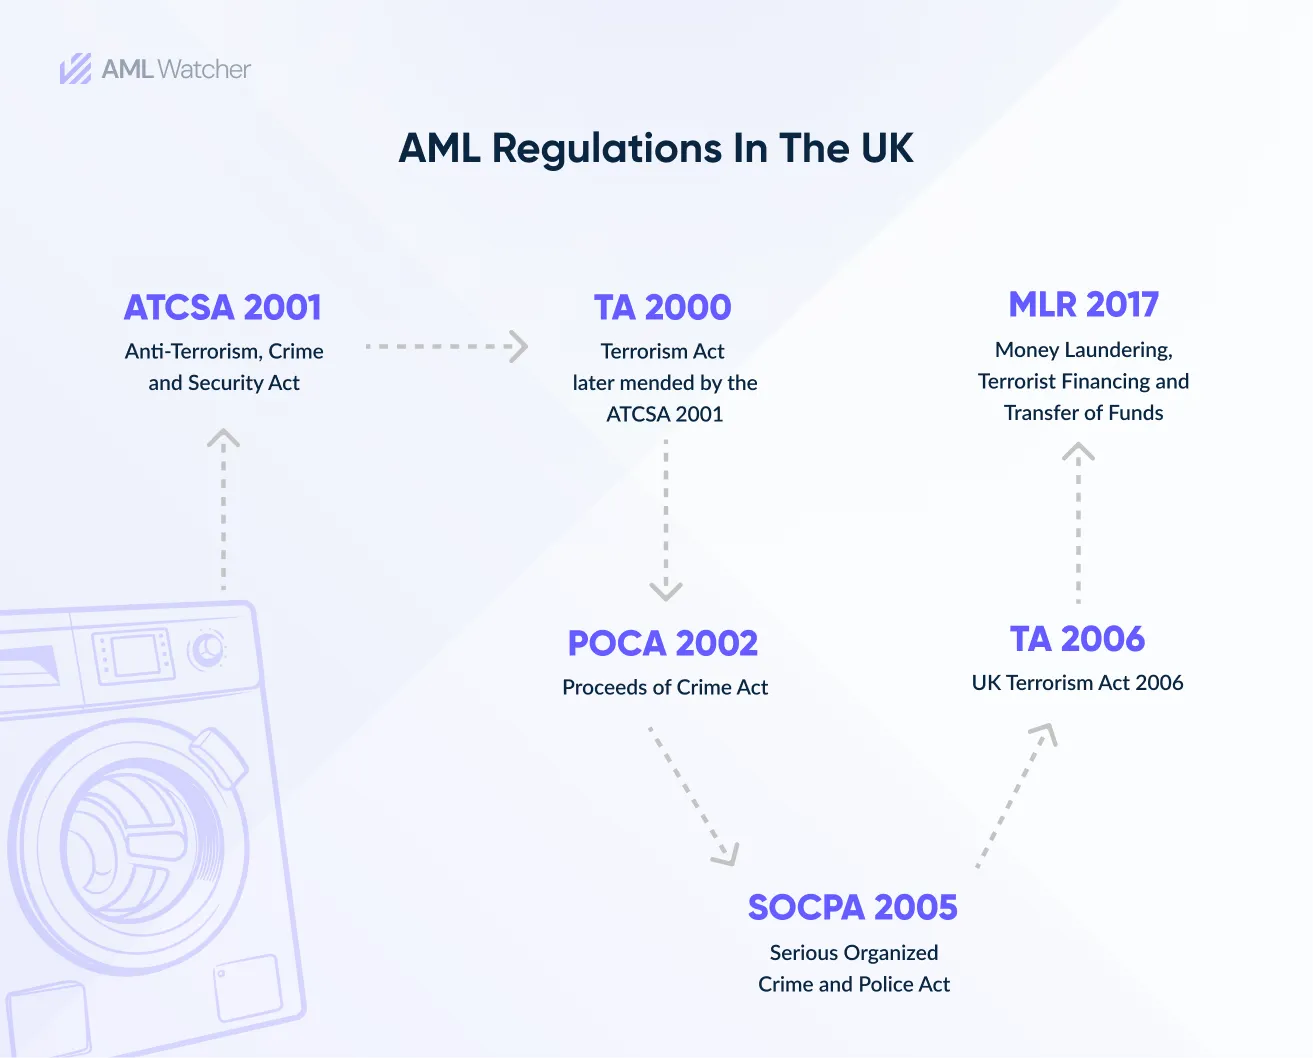 This infographic shows (AML) regulations in the UK